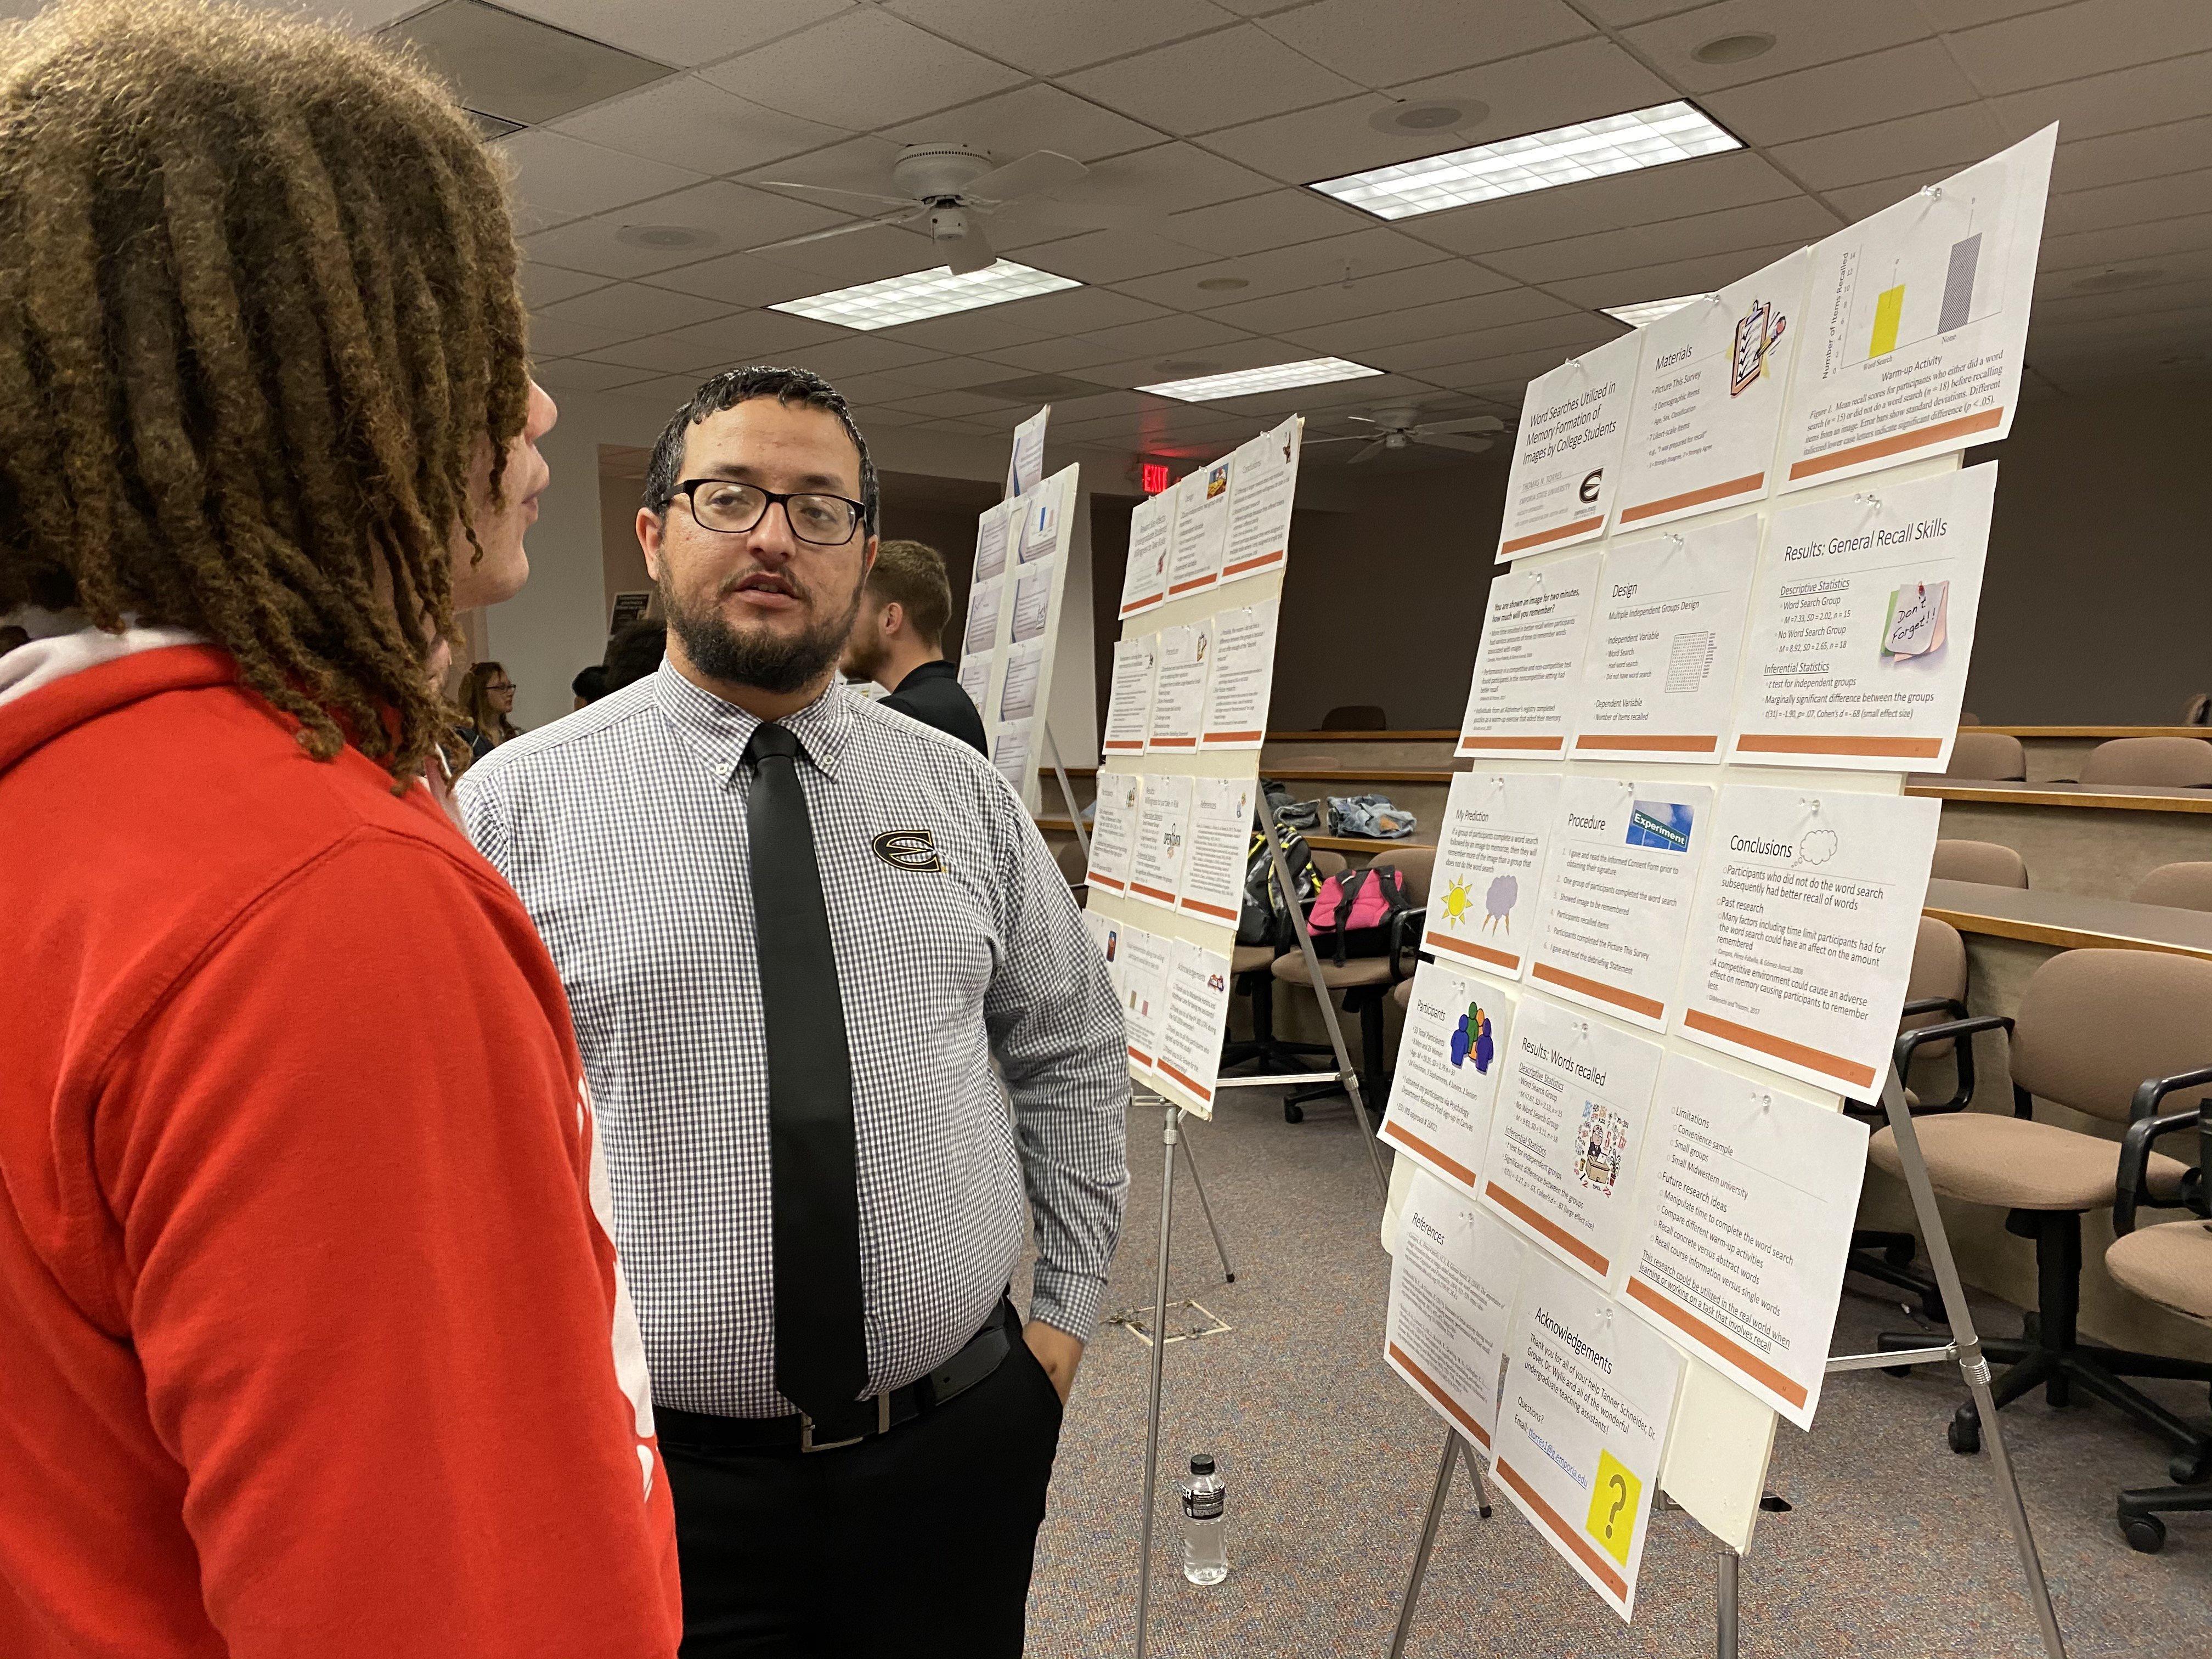 Emporia State Psychology students discussing poster presentation